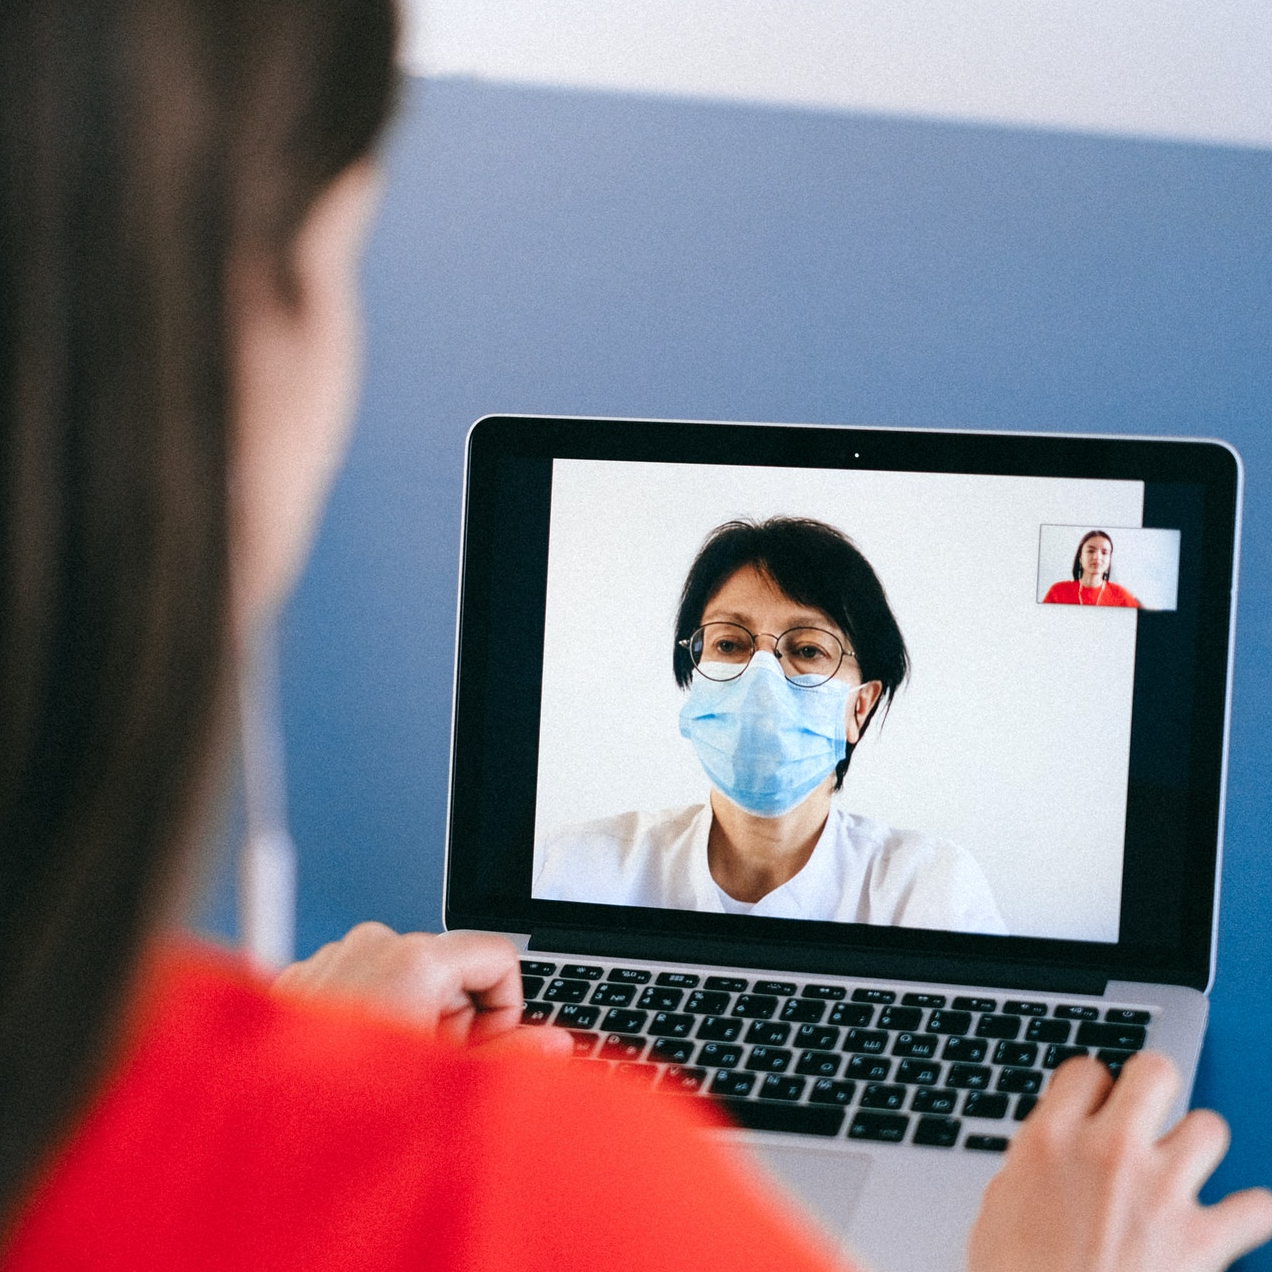 Telemedicine Trends During COVID-19